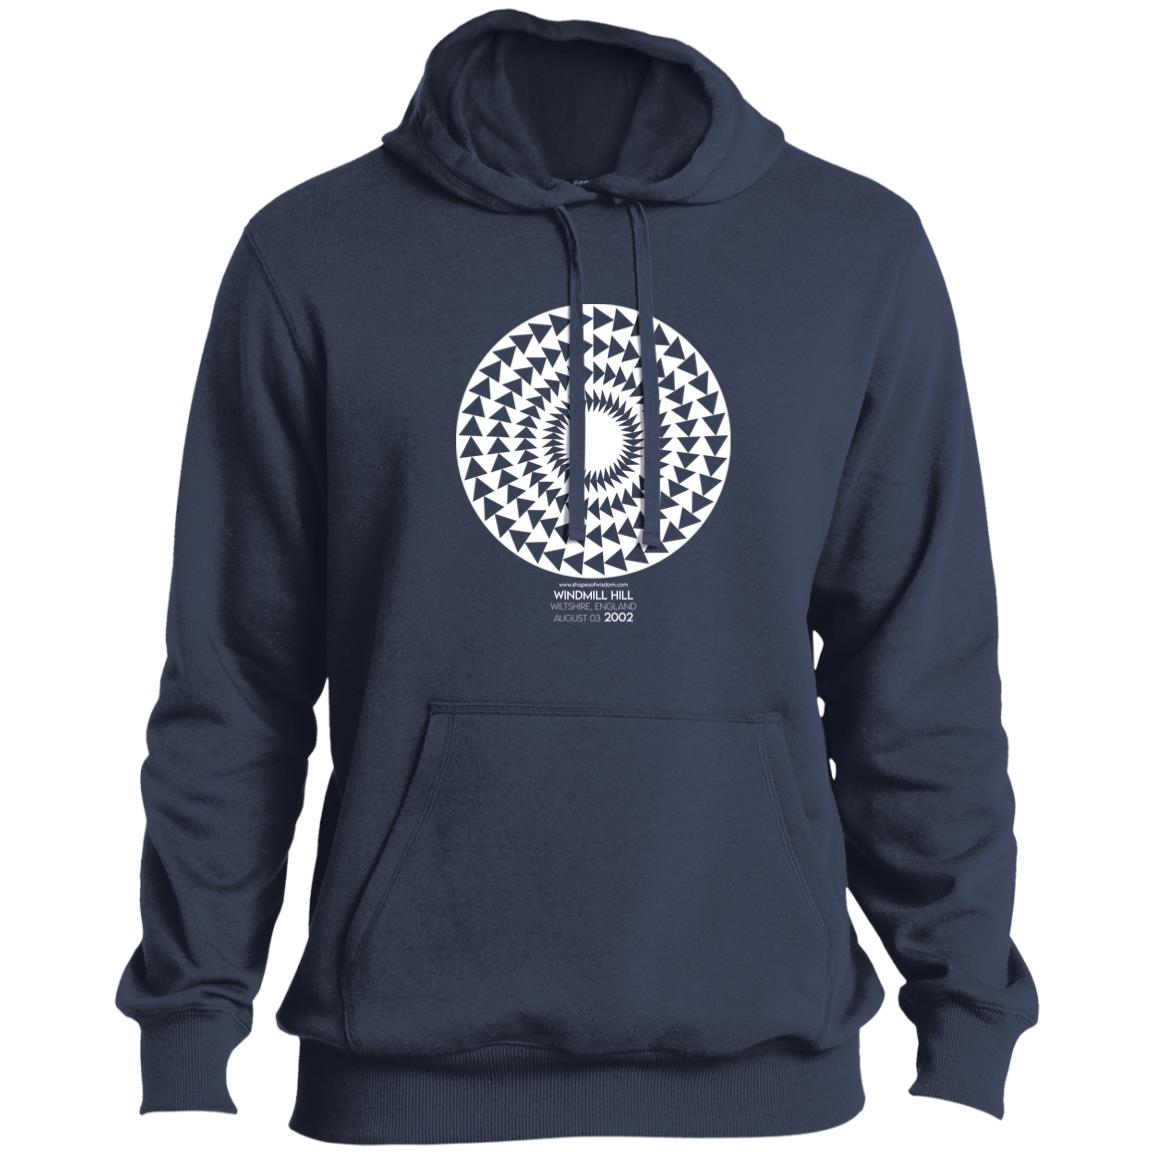 Crop Circle Pullover Hoodie - Windmill Hill 7